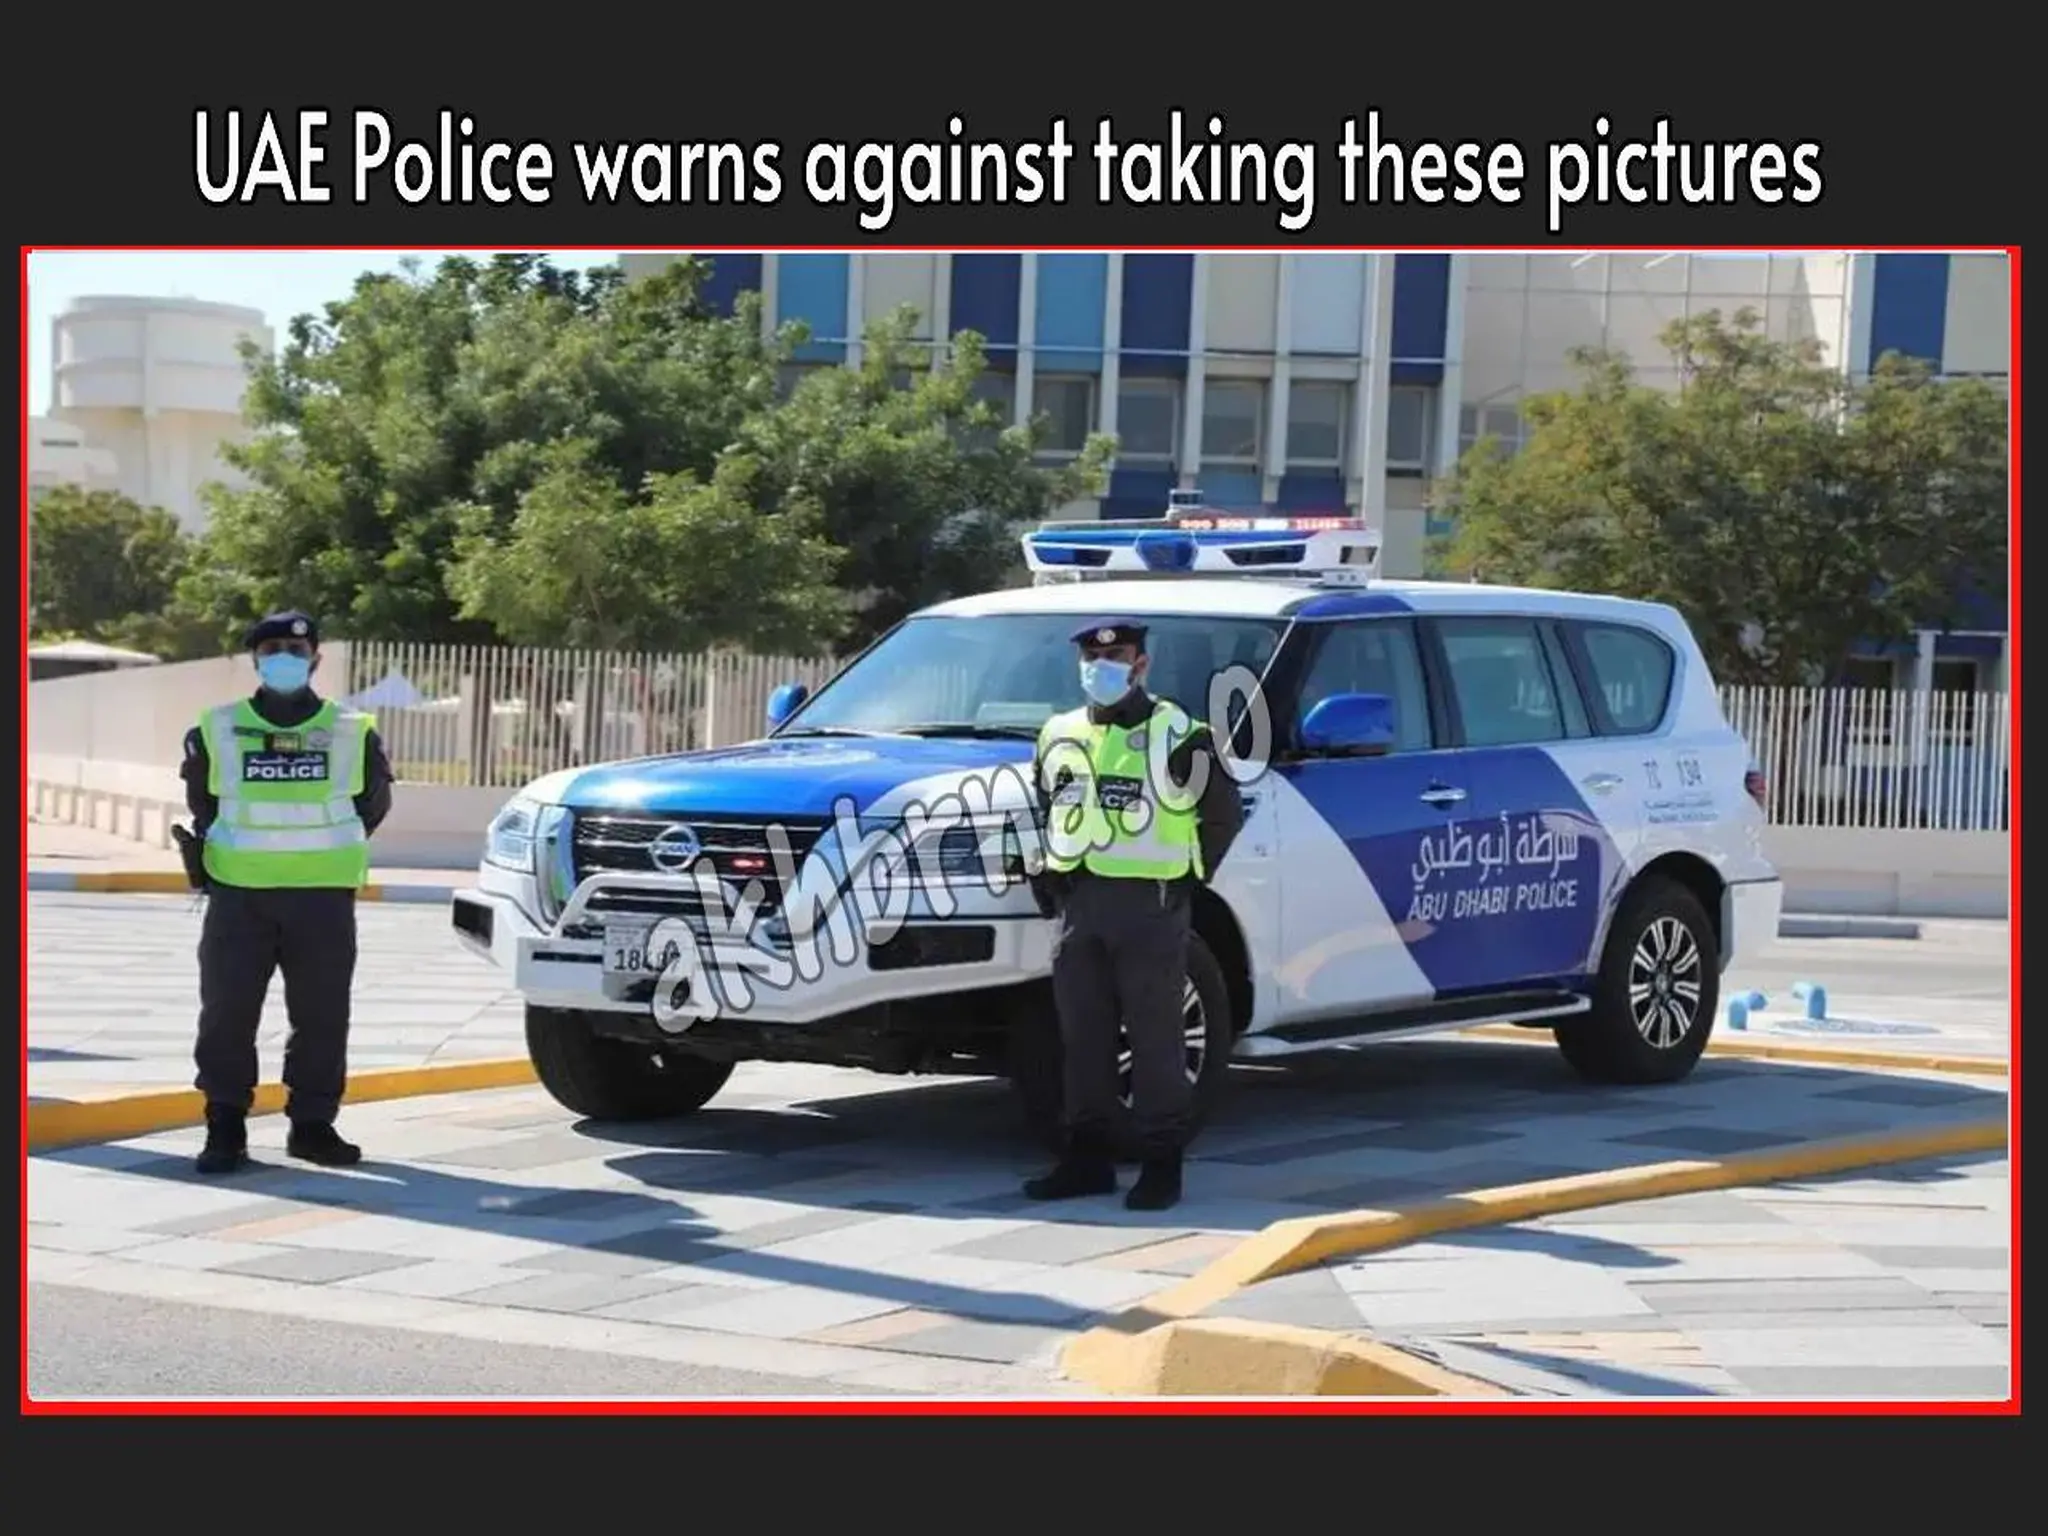 UAE Police warns against taking these pictures, and the penalty is a $272 fine